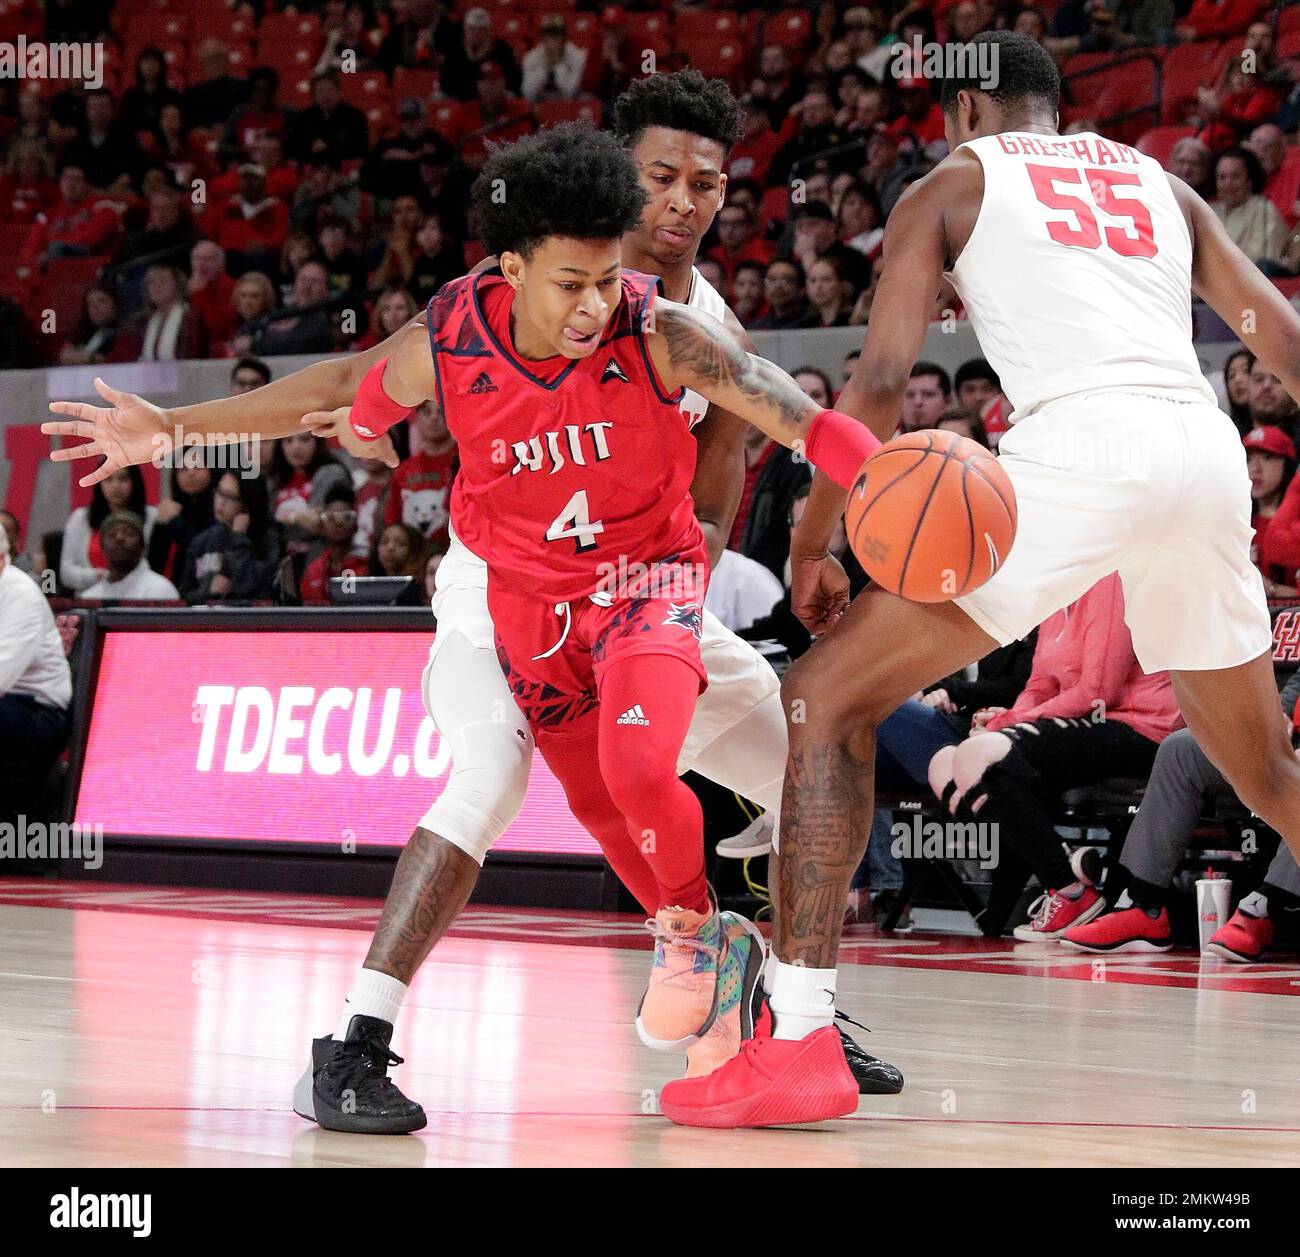 New Jersey Institute of Technology guard Zach Cooks (4) drives the ball  between Houston guard Nate Hinton, center, and forward Brison Gresham (55)  Saturday, Dec. 29, 2018, in Houston. (AP Photo/Michael Wyke